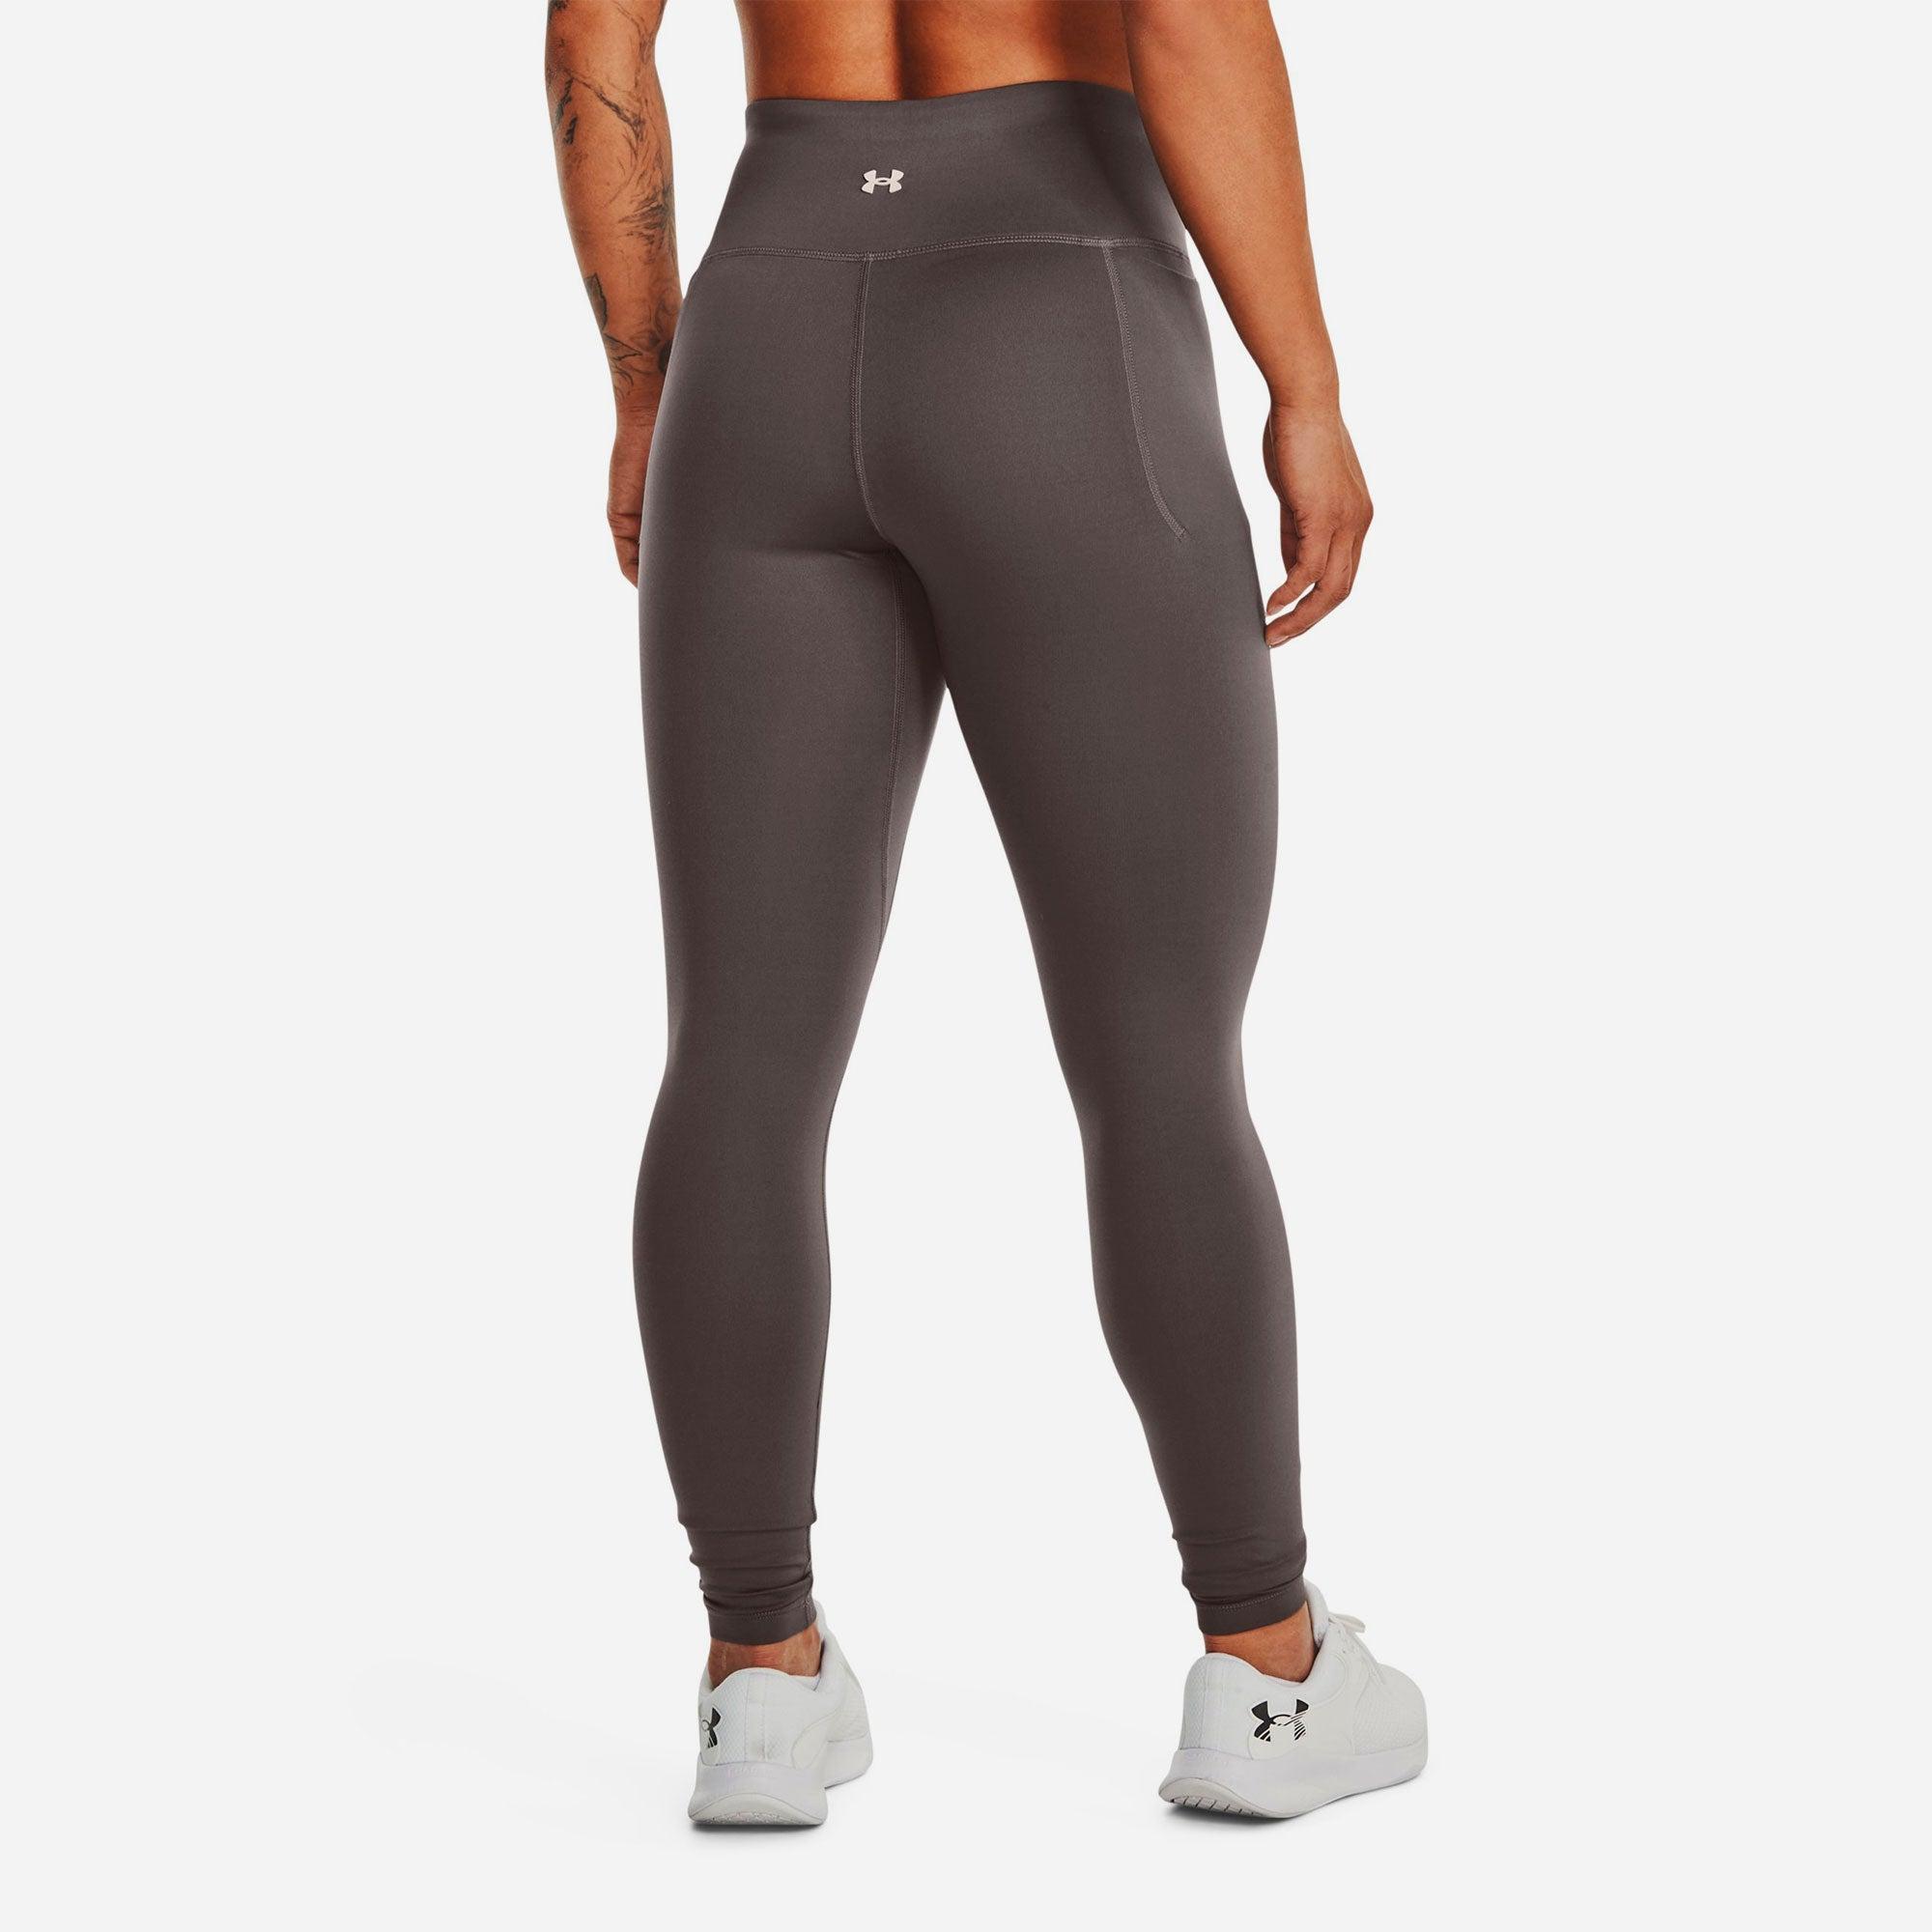 Quần thể thao nữ Under Armour Meridian - 1373966-176